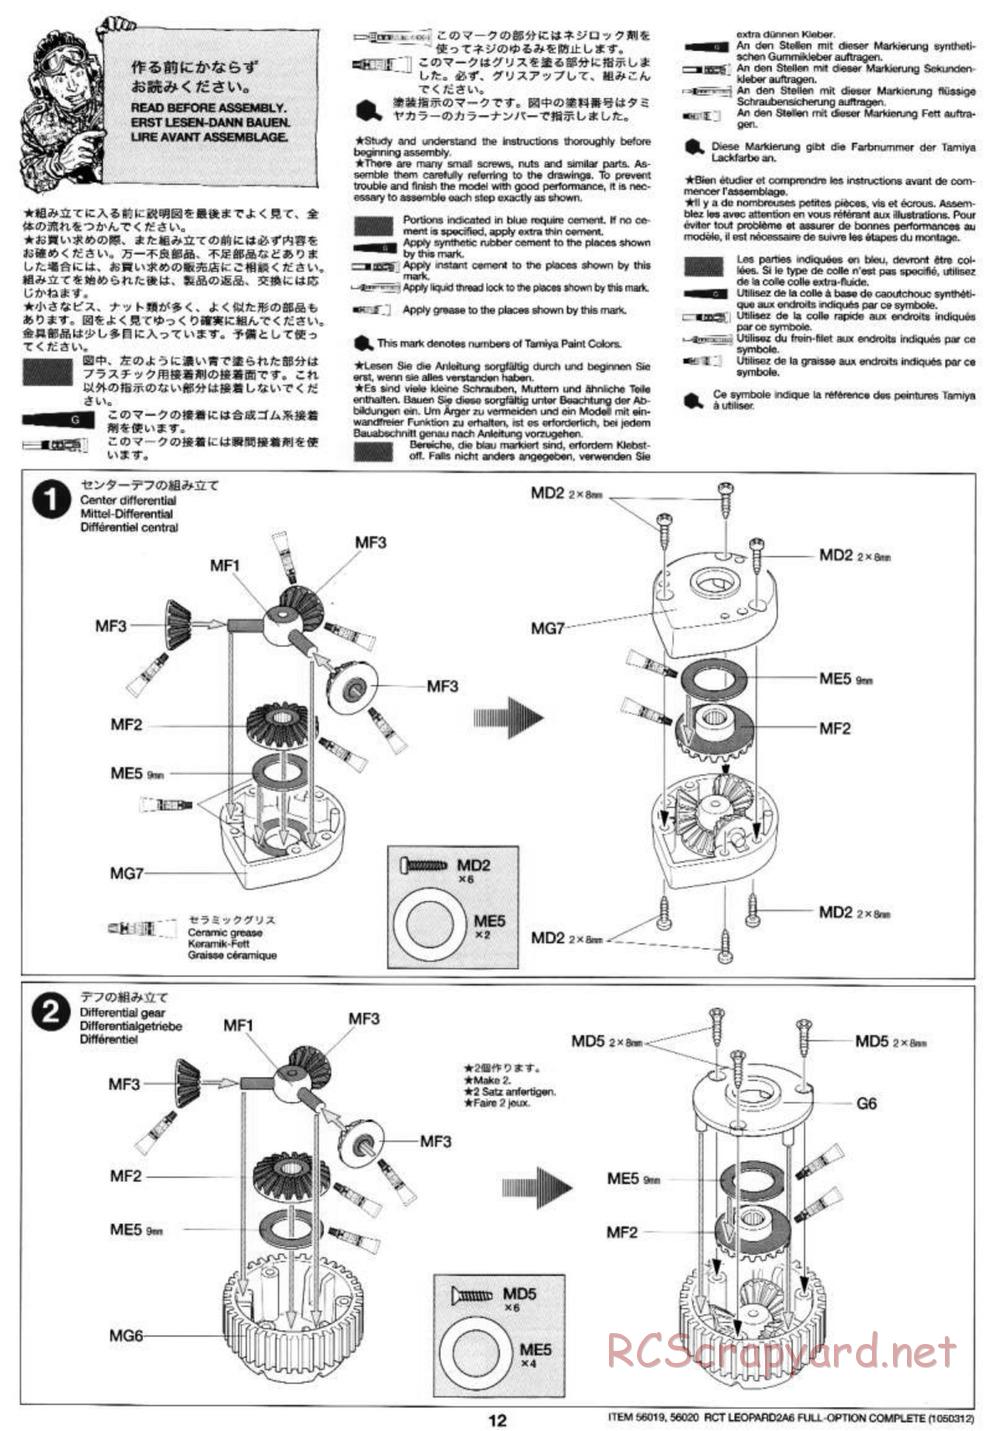 Tamiya - Leopard 2 A6 - 1/16 Scale Chassis - Manual - Page 12